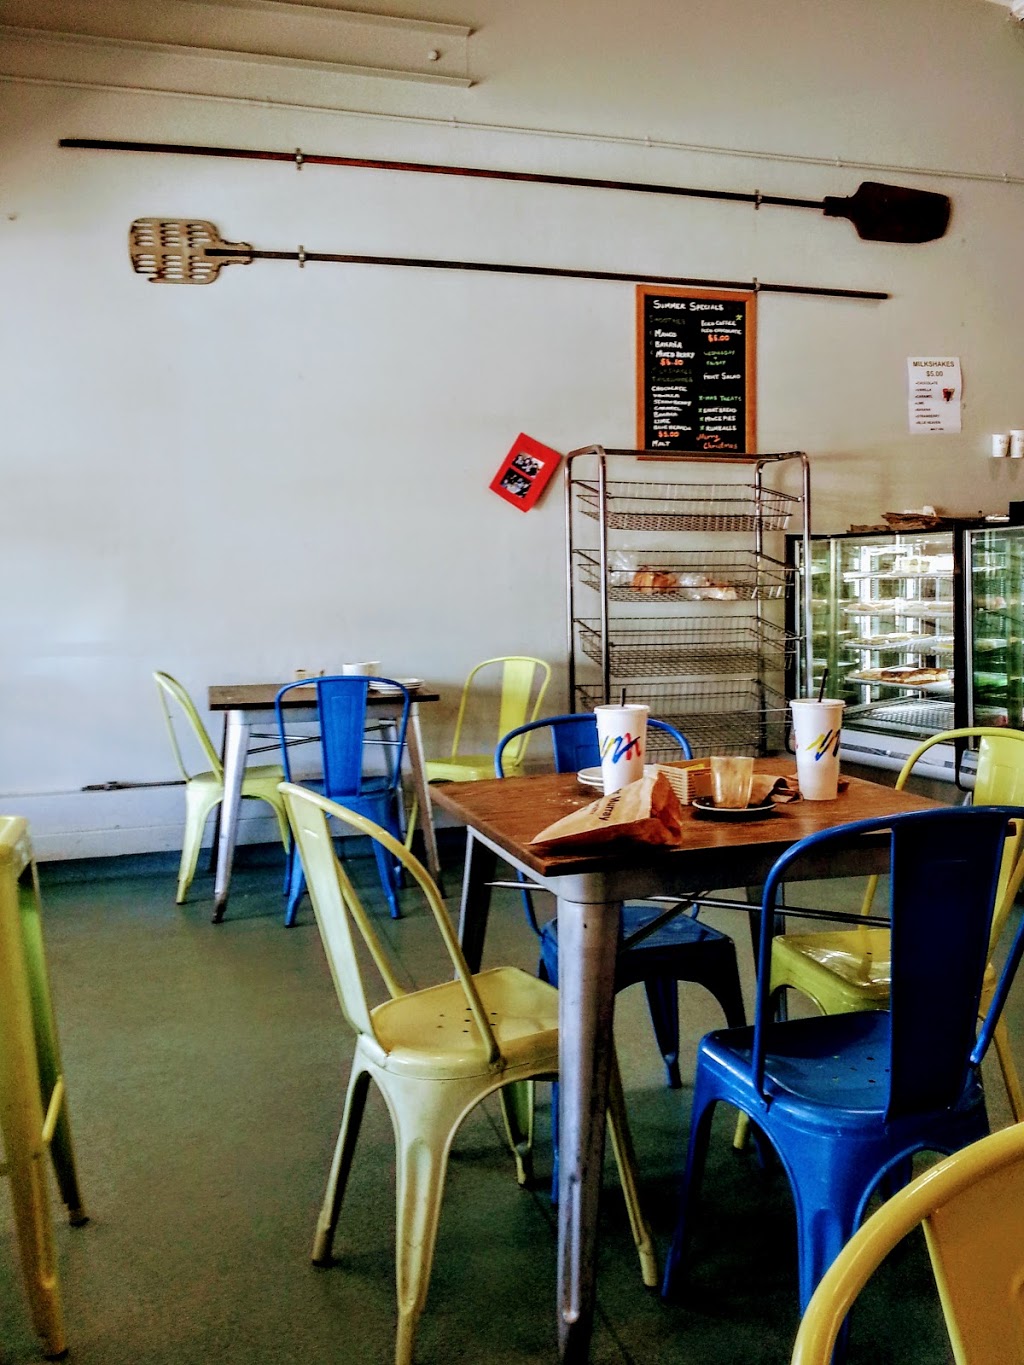 Upper Murray Community Bakery | cafe | 37 Hanson St, Corryong VIC 3707, Australia | 0260761196 OR +61 2 6076 1196